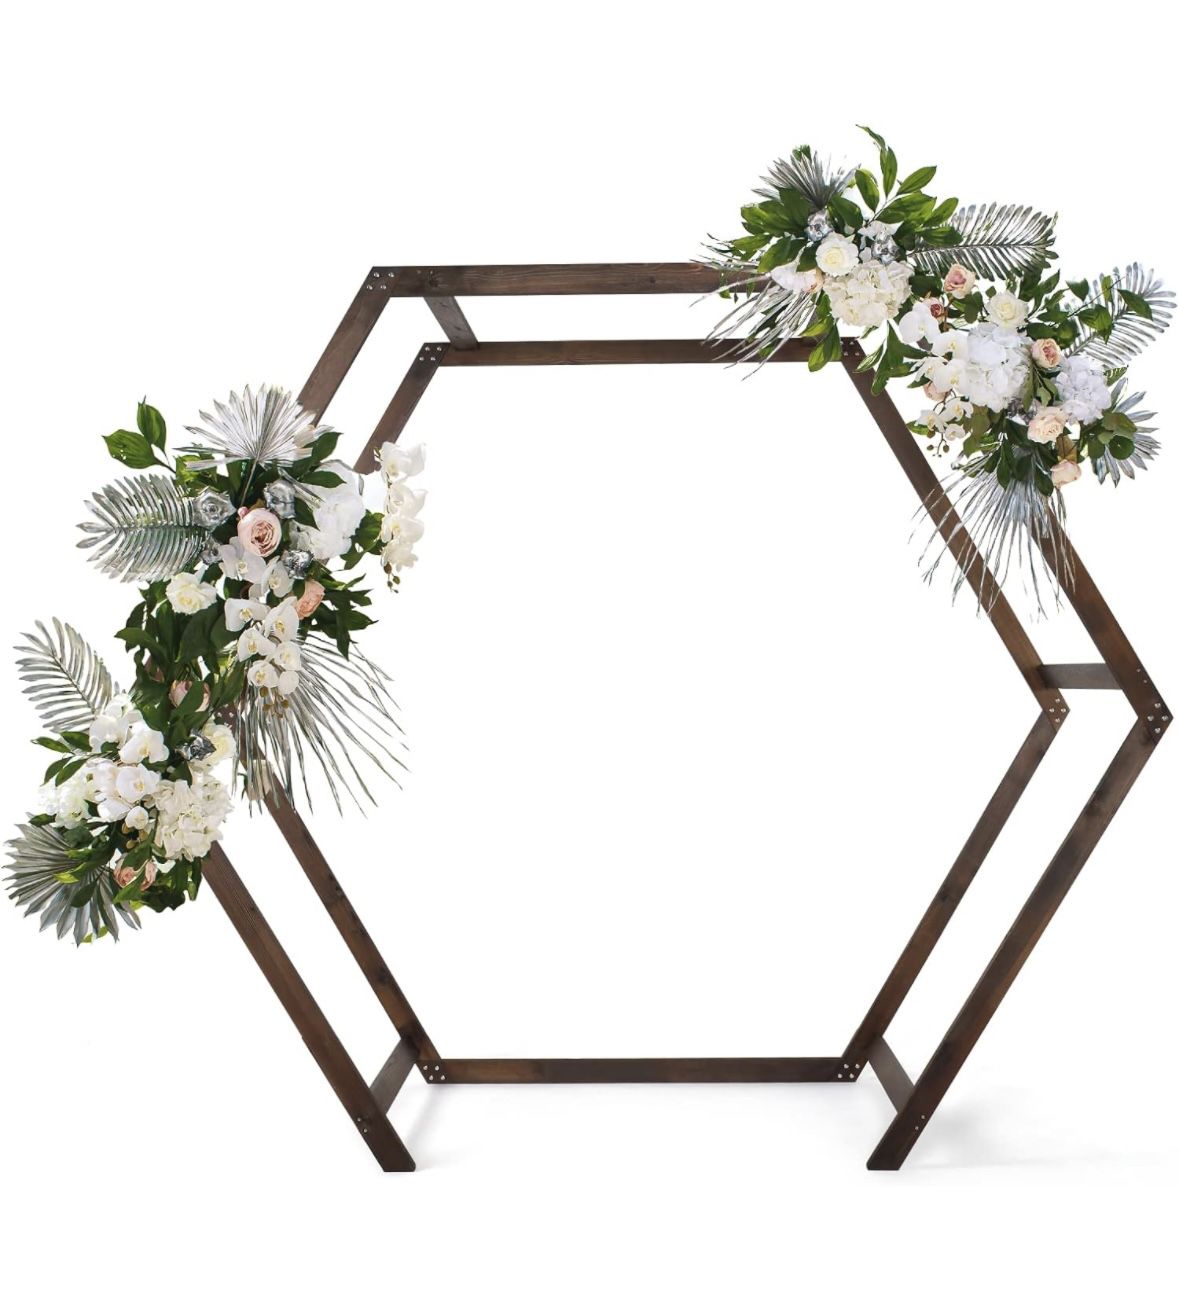 Wooden Wedding arch For Ceremony Rustic